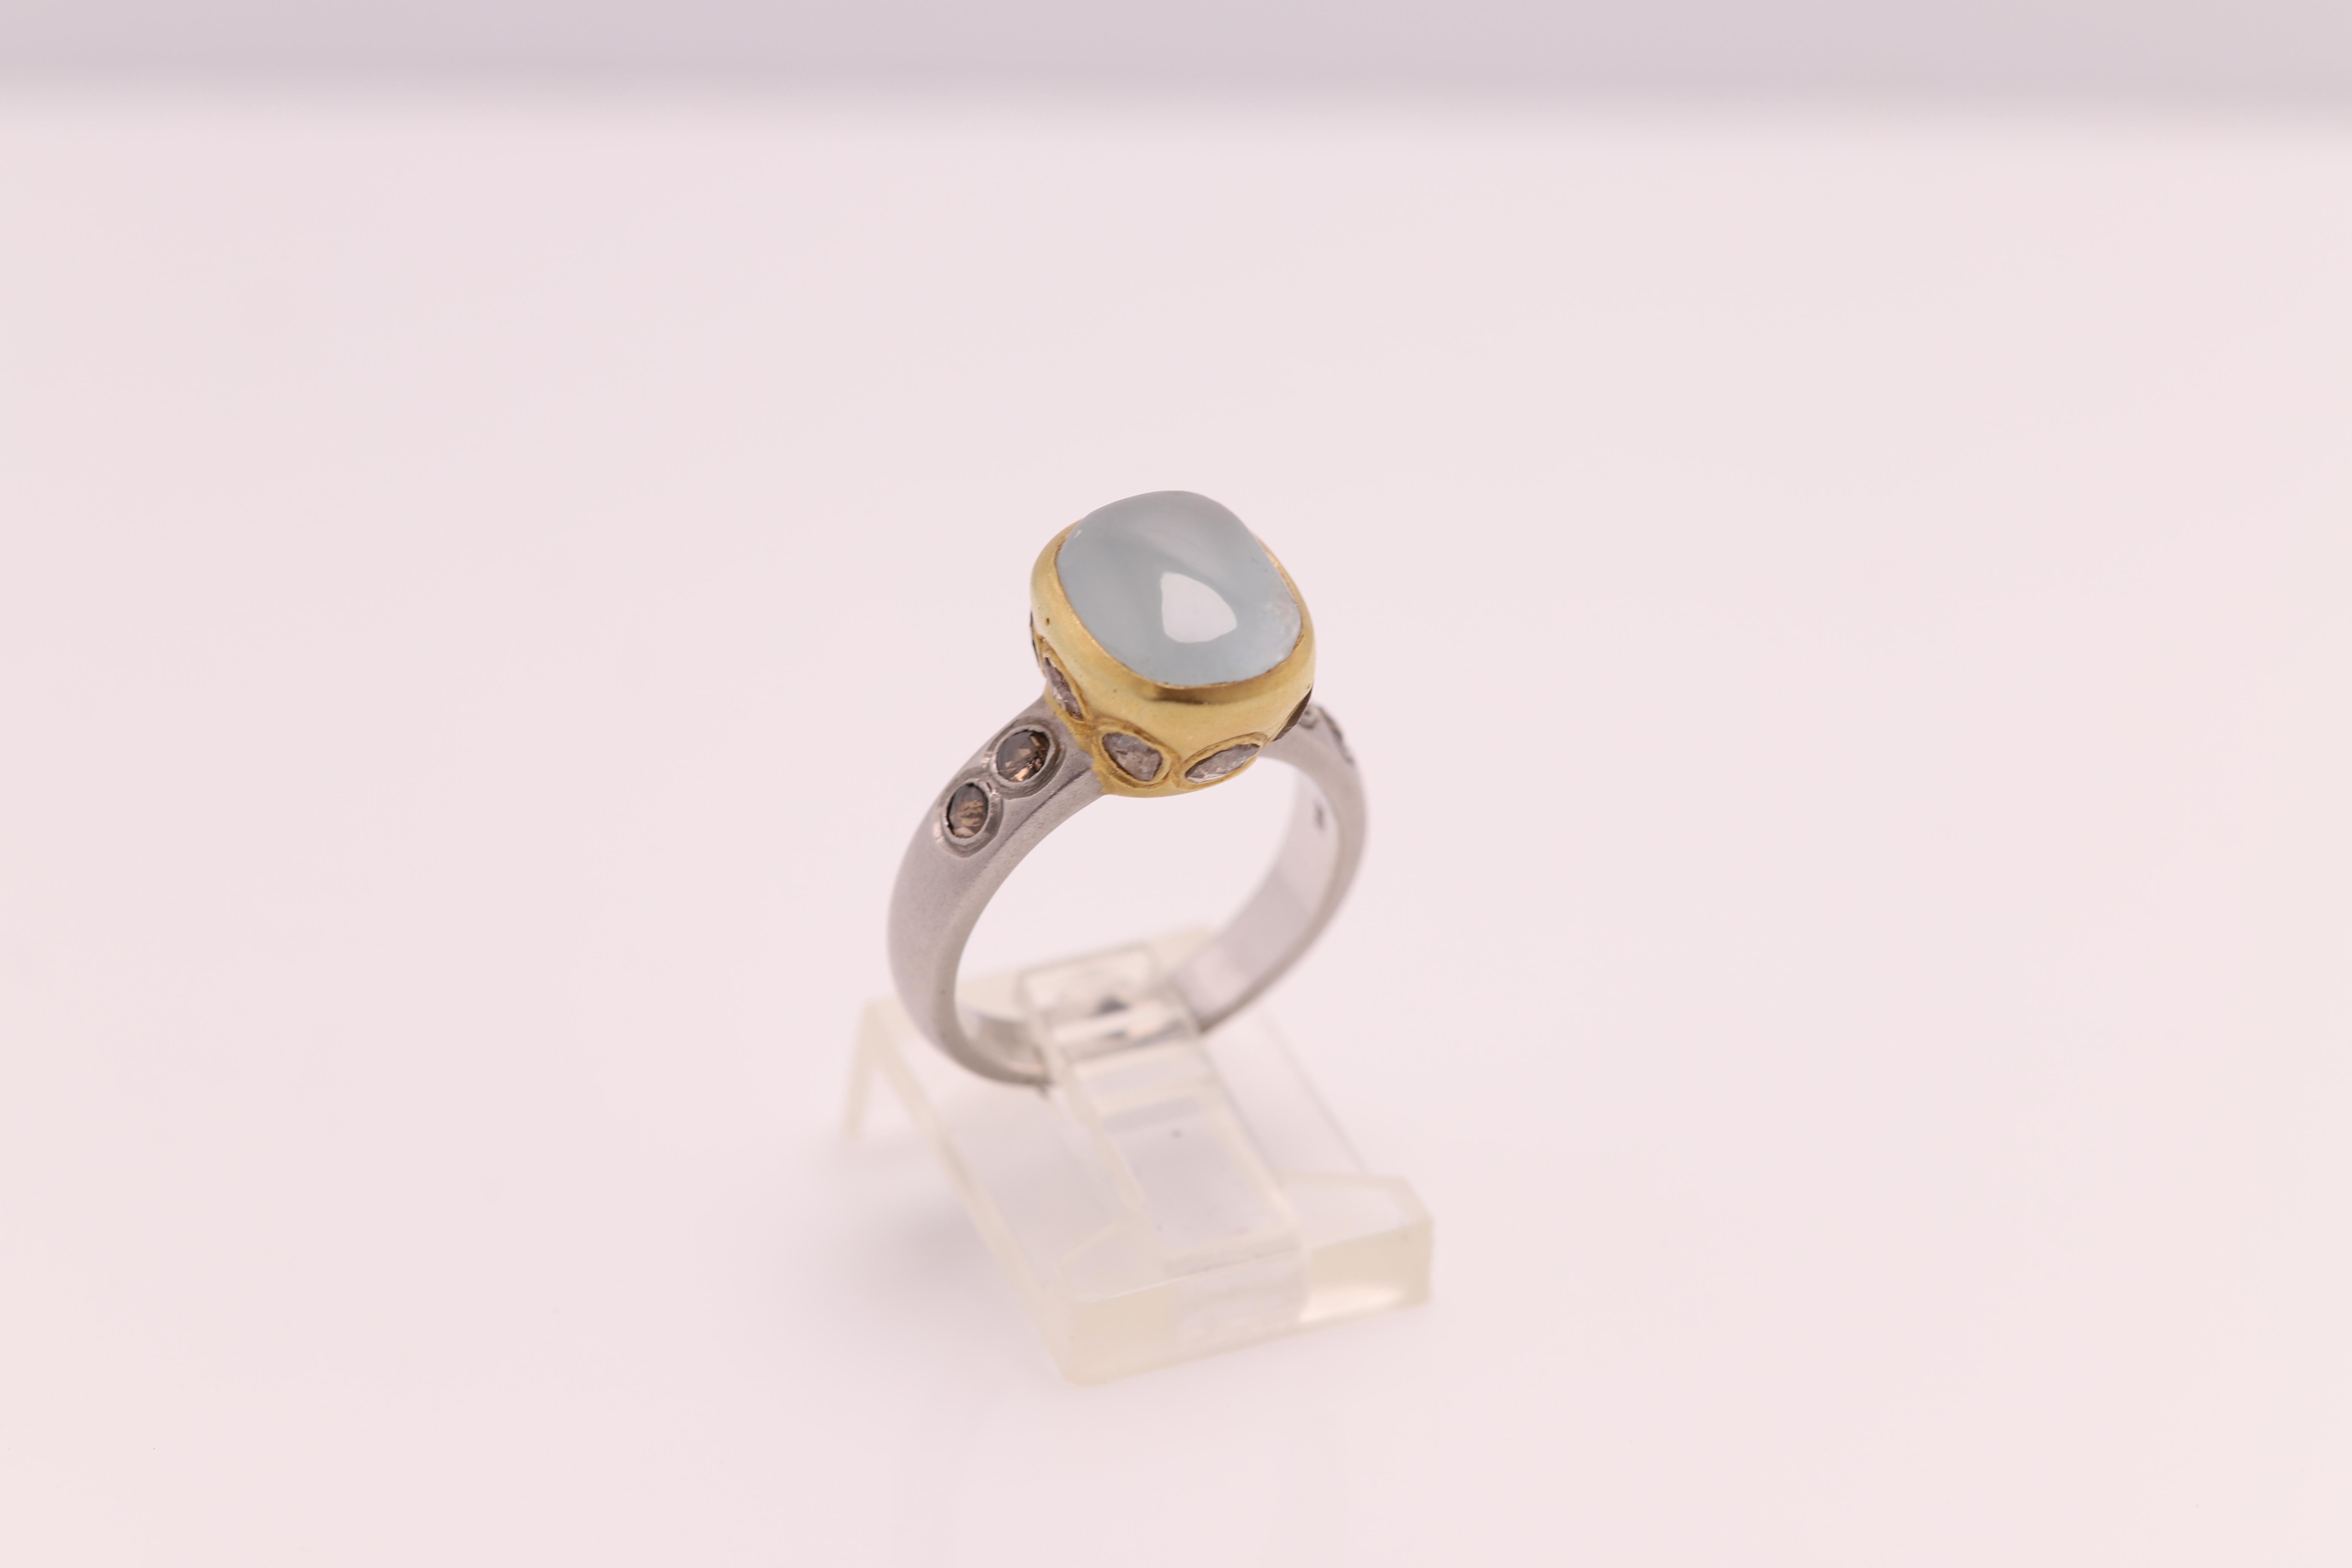 Aquamarine Ring Hand 18 Karat & Old Cut Diamonds Vintage Aquamarine Gold Ring In New Condition For Sale In Brooklyn, NY